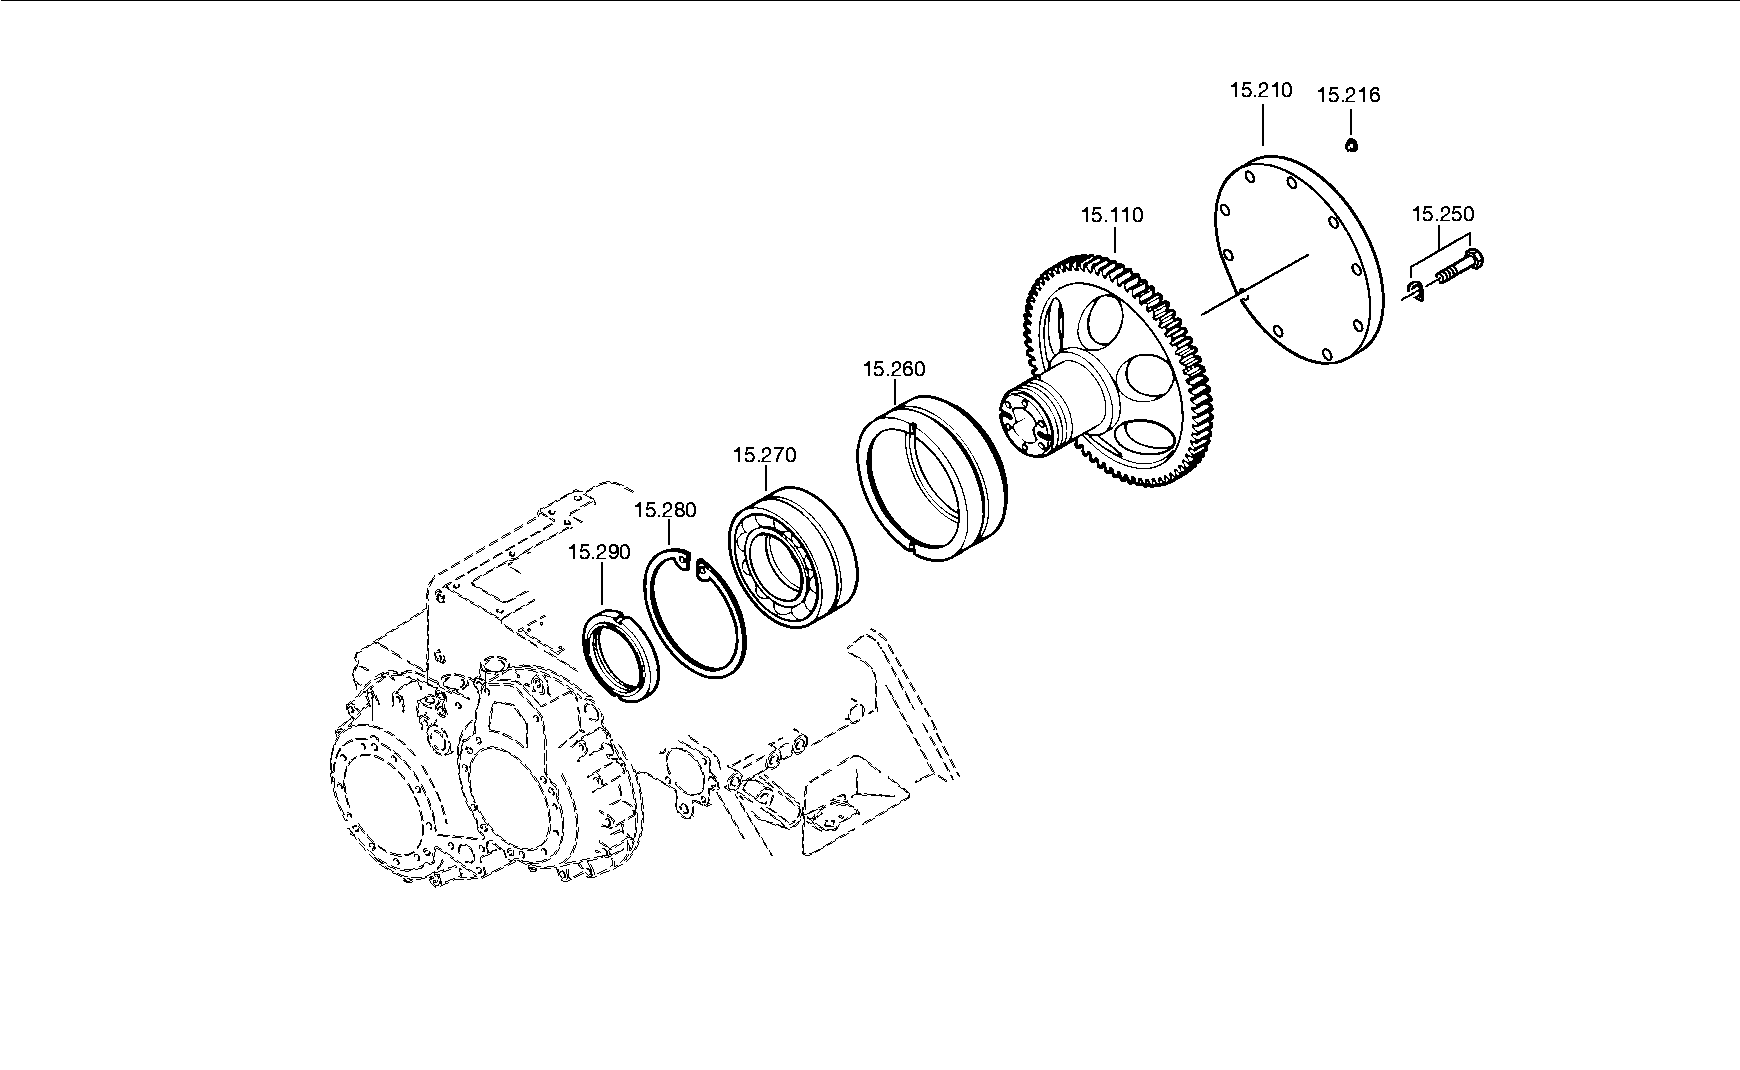 drawing for LIEBHERR GMBH 0500217 - CIRCLIP (figure 2)